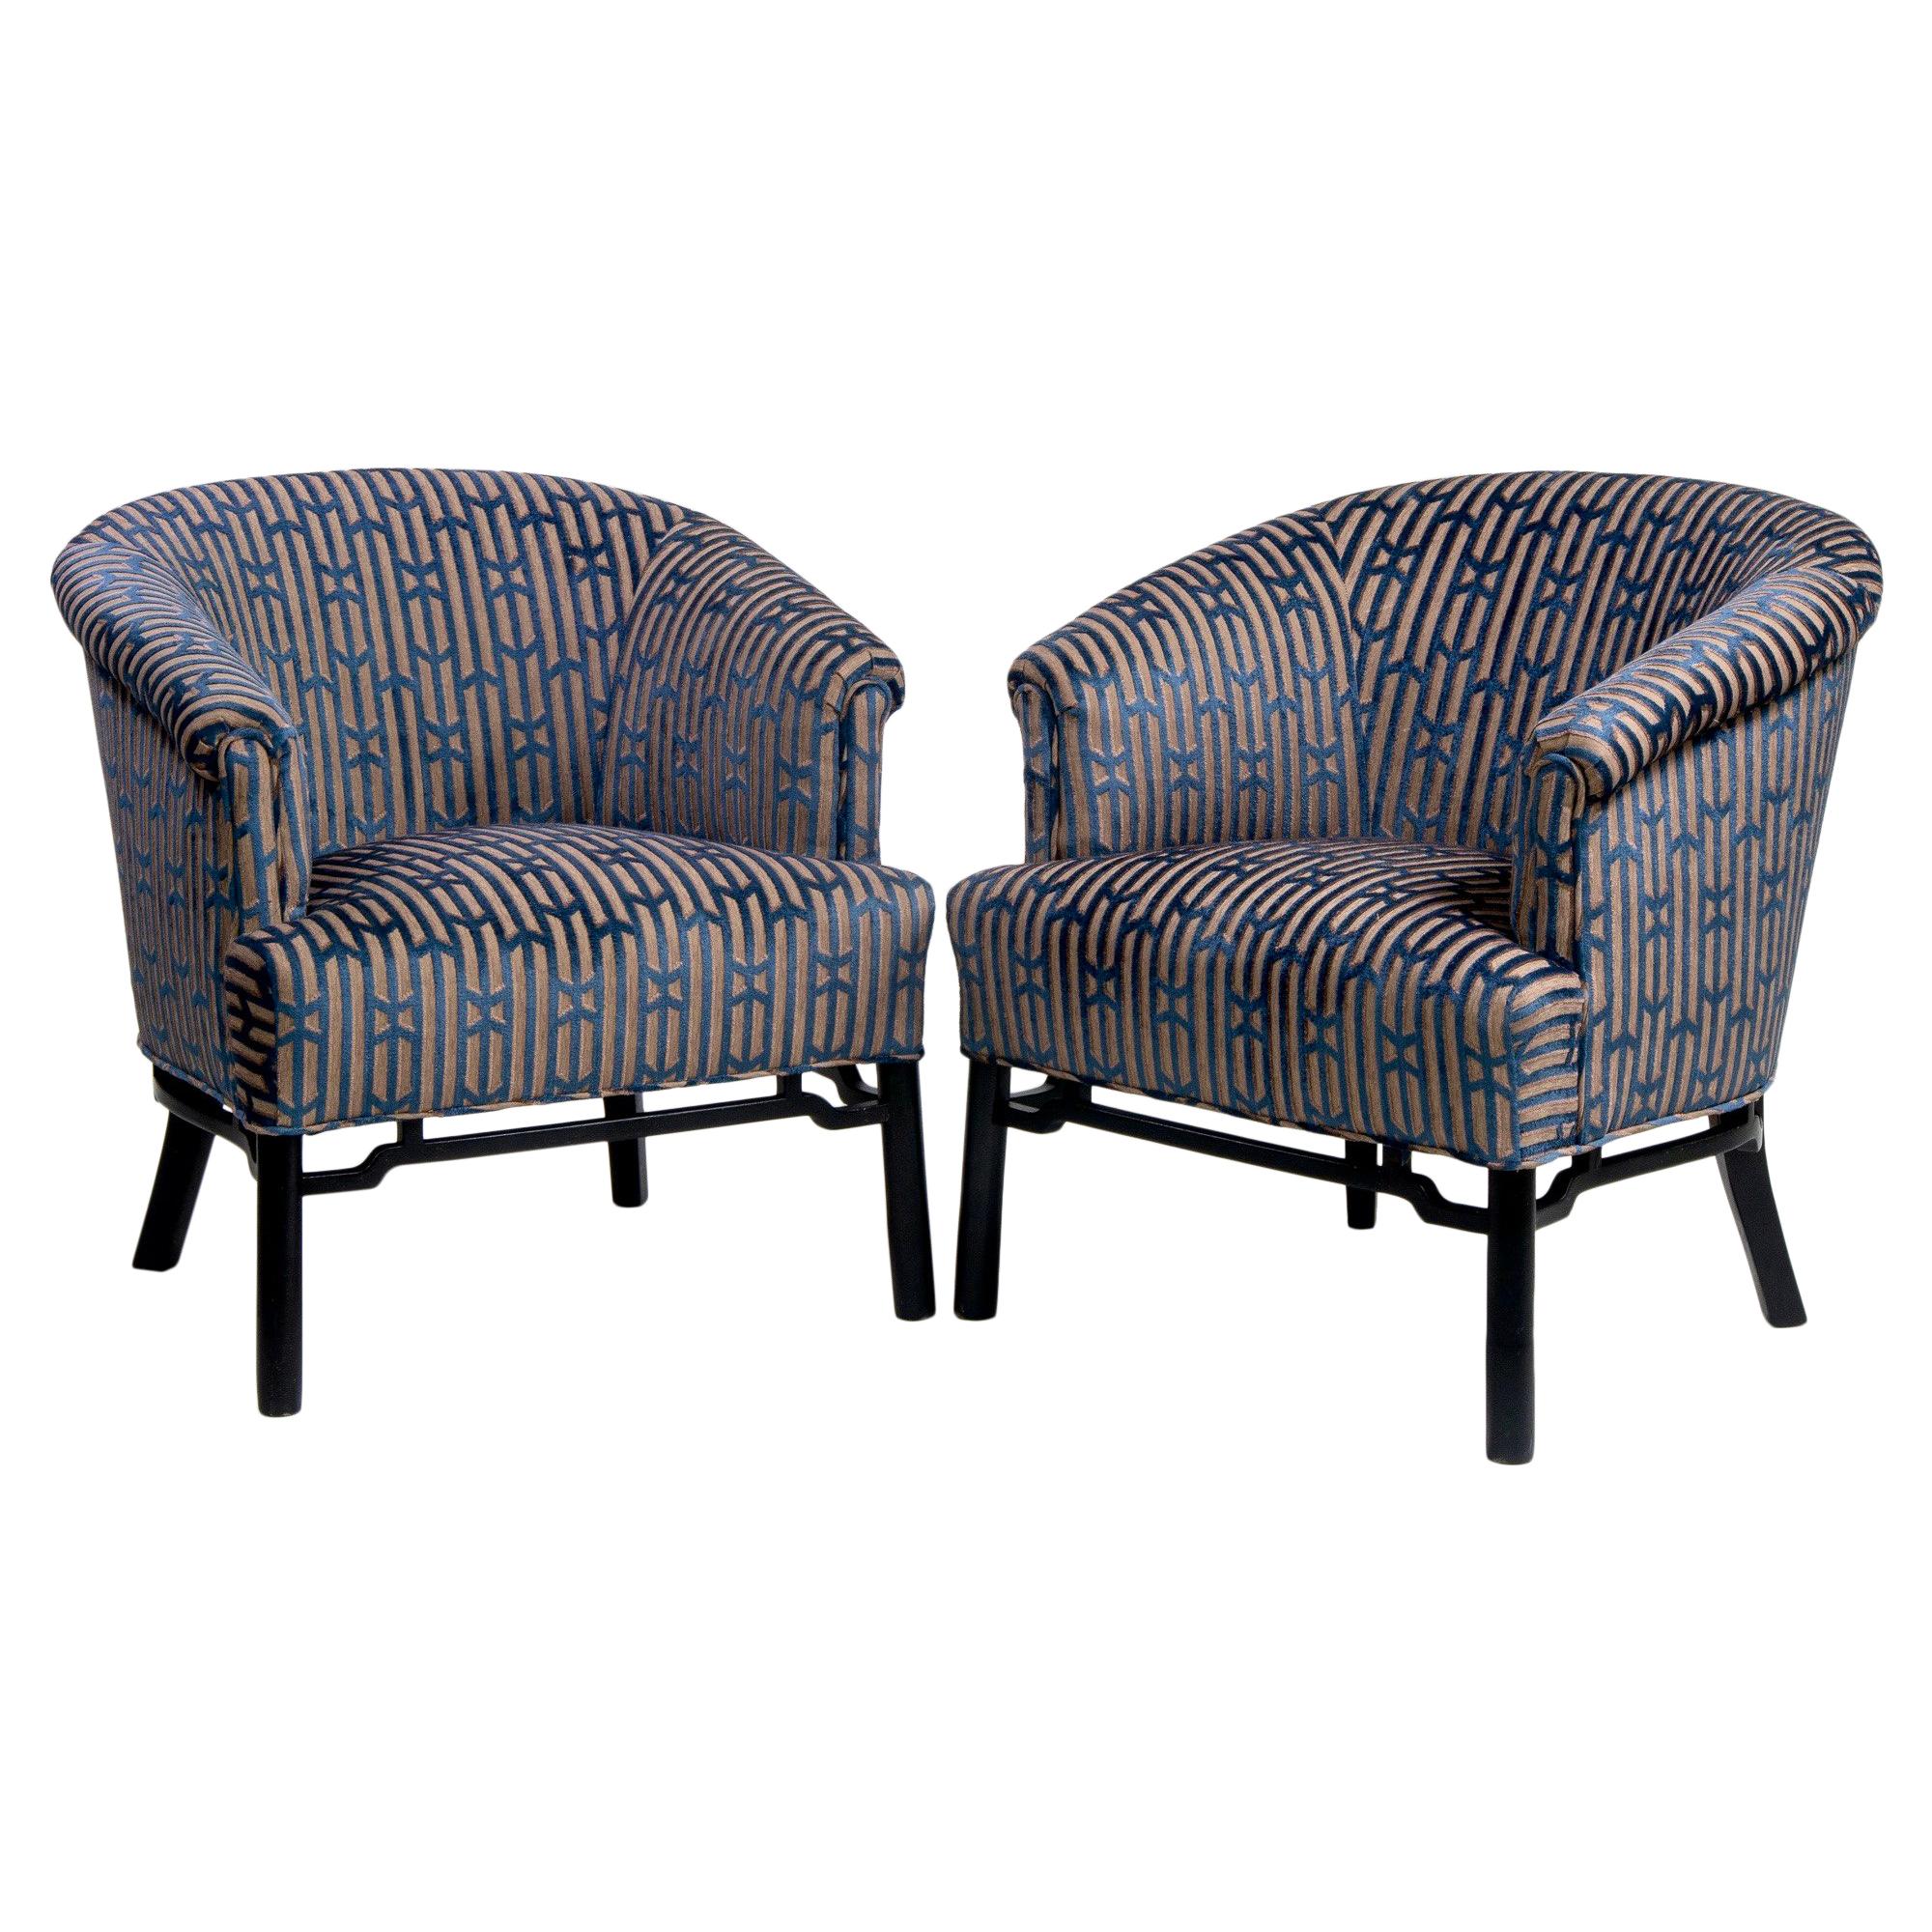 Pair of Midcentury Baker Club Chairs with New Upholstery